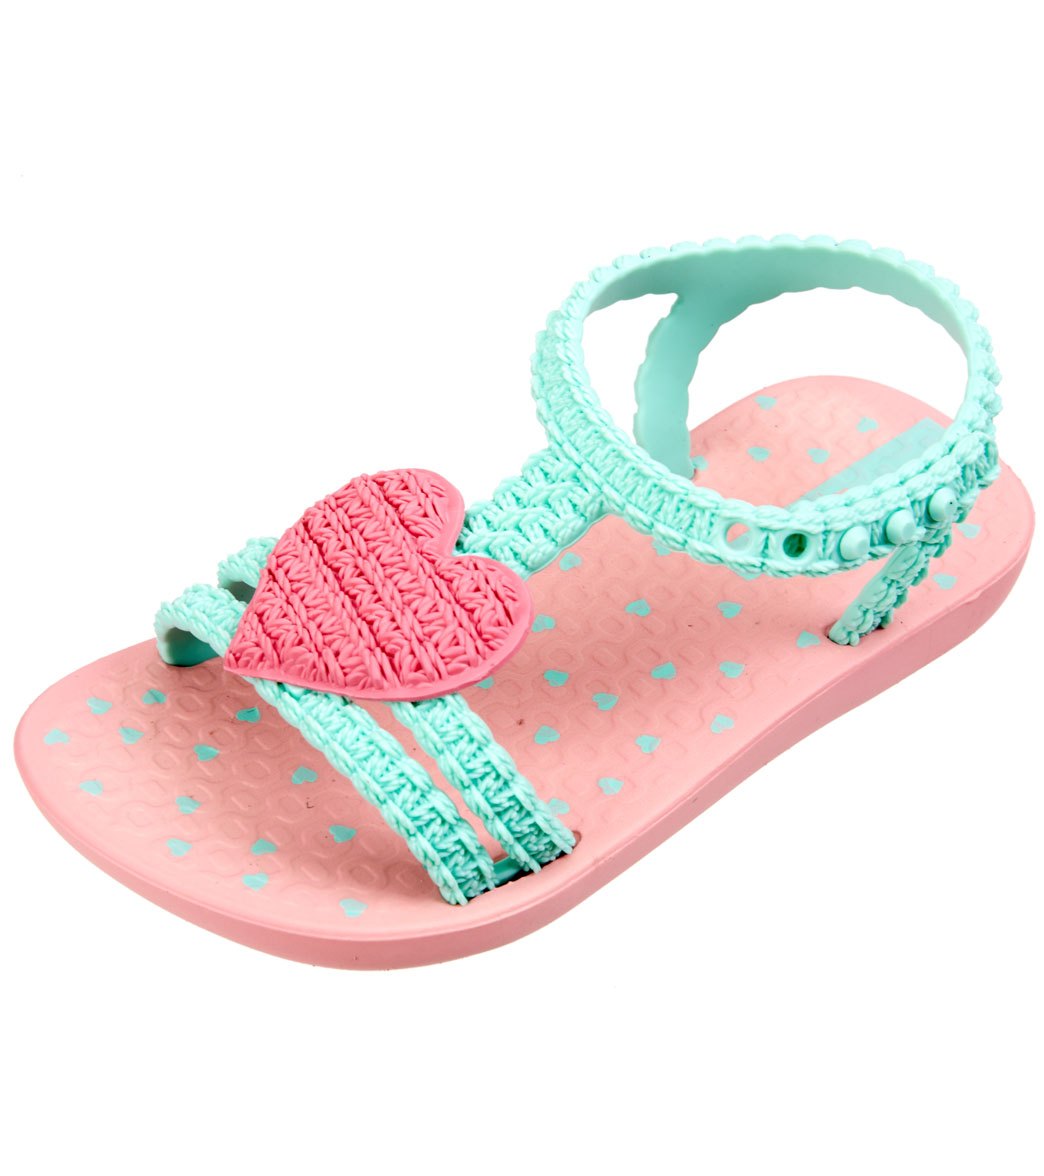 Ipanema Infant My First Sandals - Pink/Green 6 Plastic - Swimoutlet.com